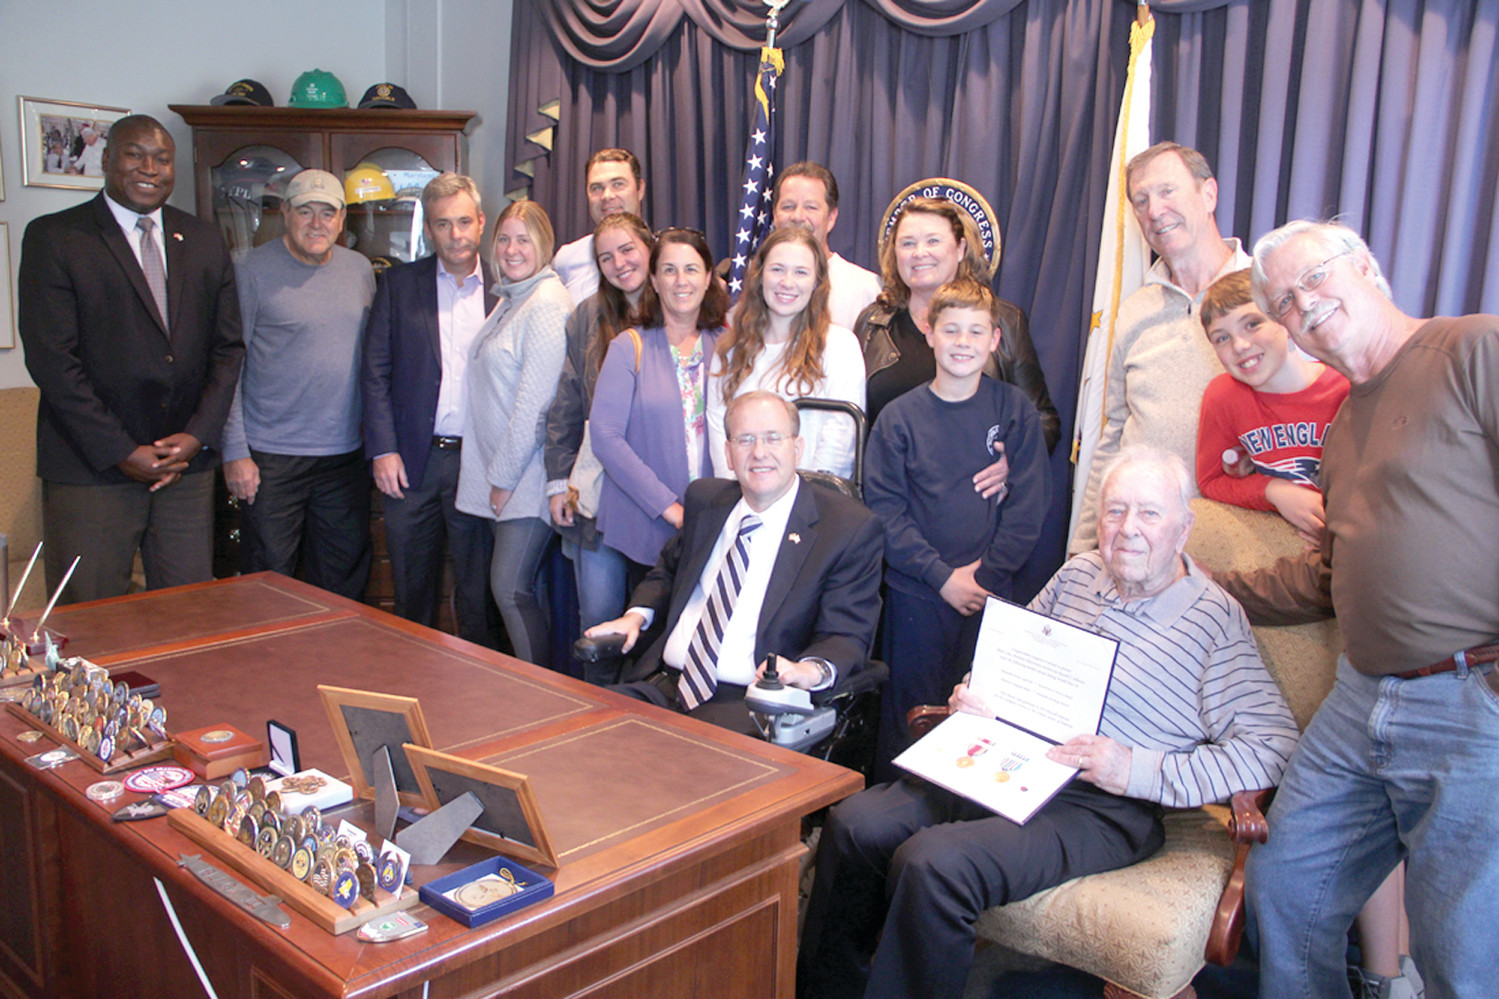 CELEBRATING HIS SERVICE: Congressman Jim Langevin presented WWII medals and awards to Russell Johnson at his office Tuesday. They were joined by members of Johnson’s extended family and Rhode Island Director of Veterans Affairs Kasim Yarn at far left.